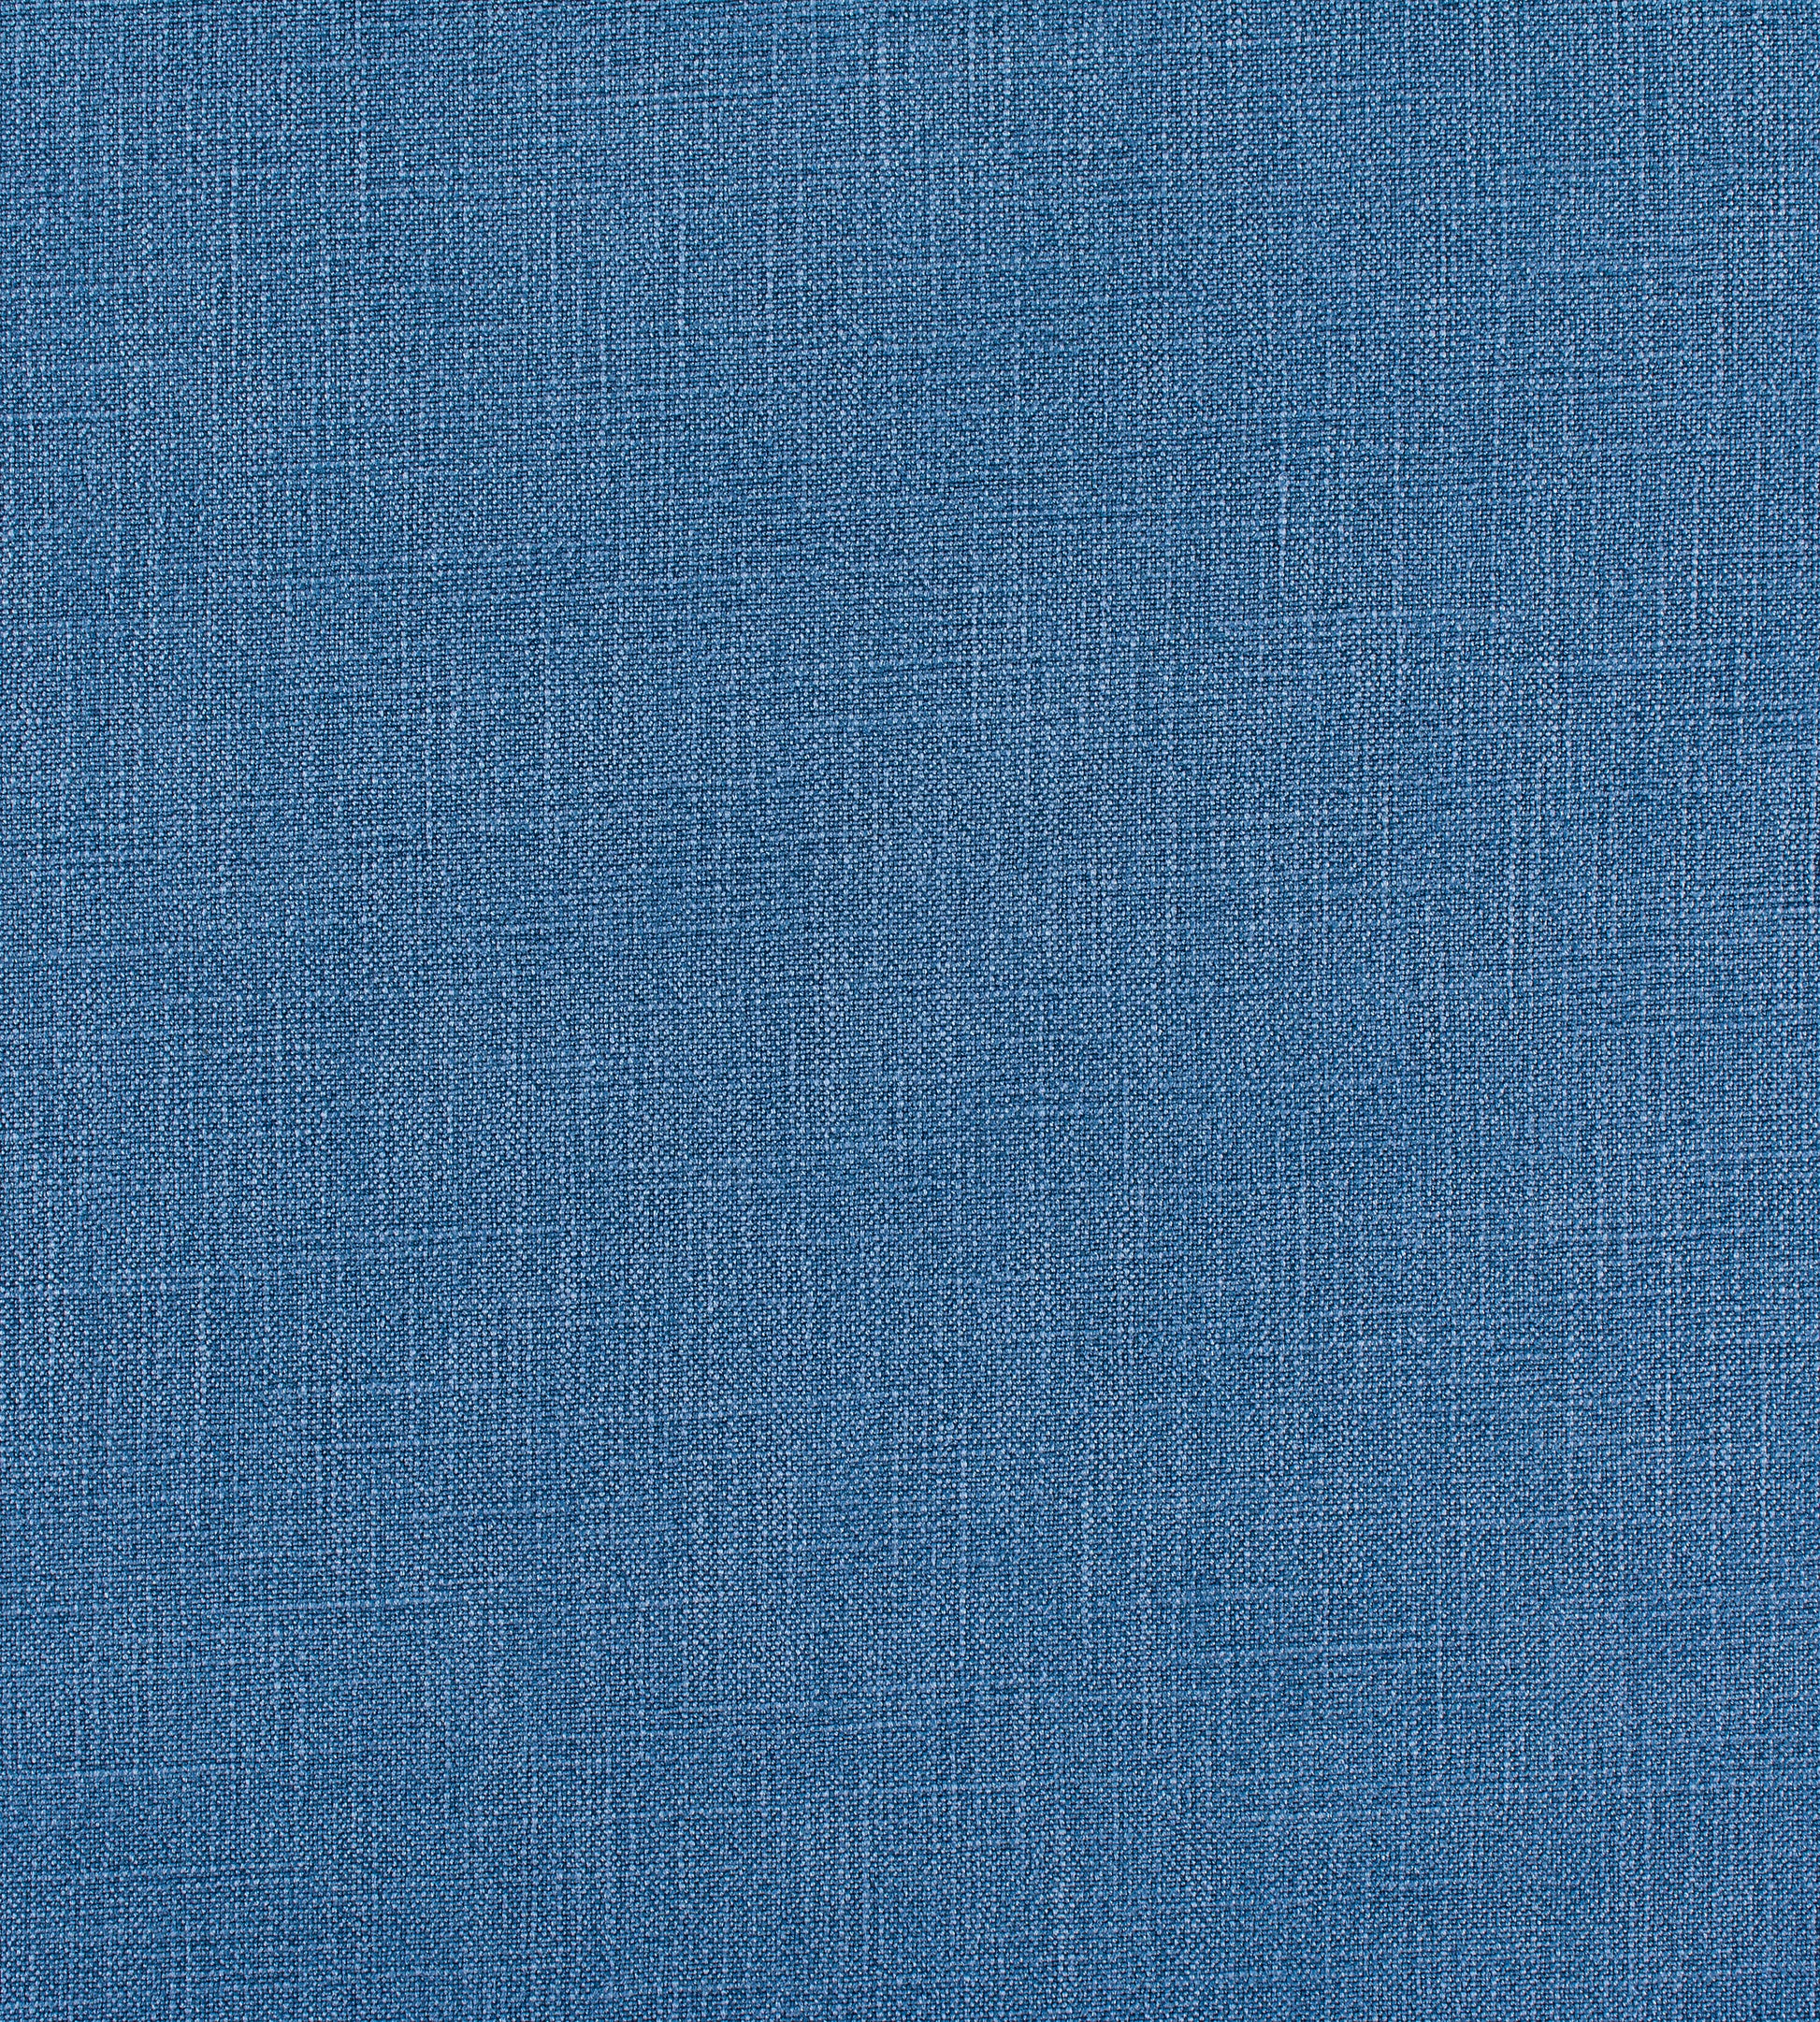 Purchase Old World Weavers Fabric Product H8 0016406T, Stonewash Lakeview 1